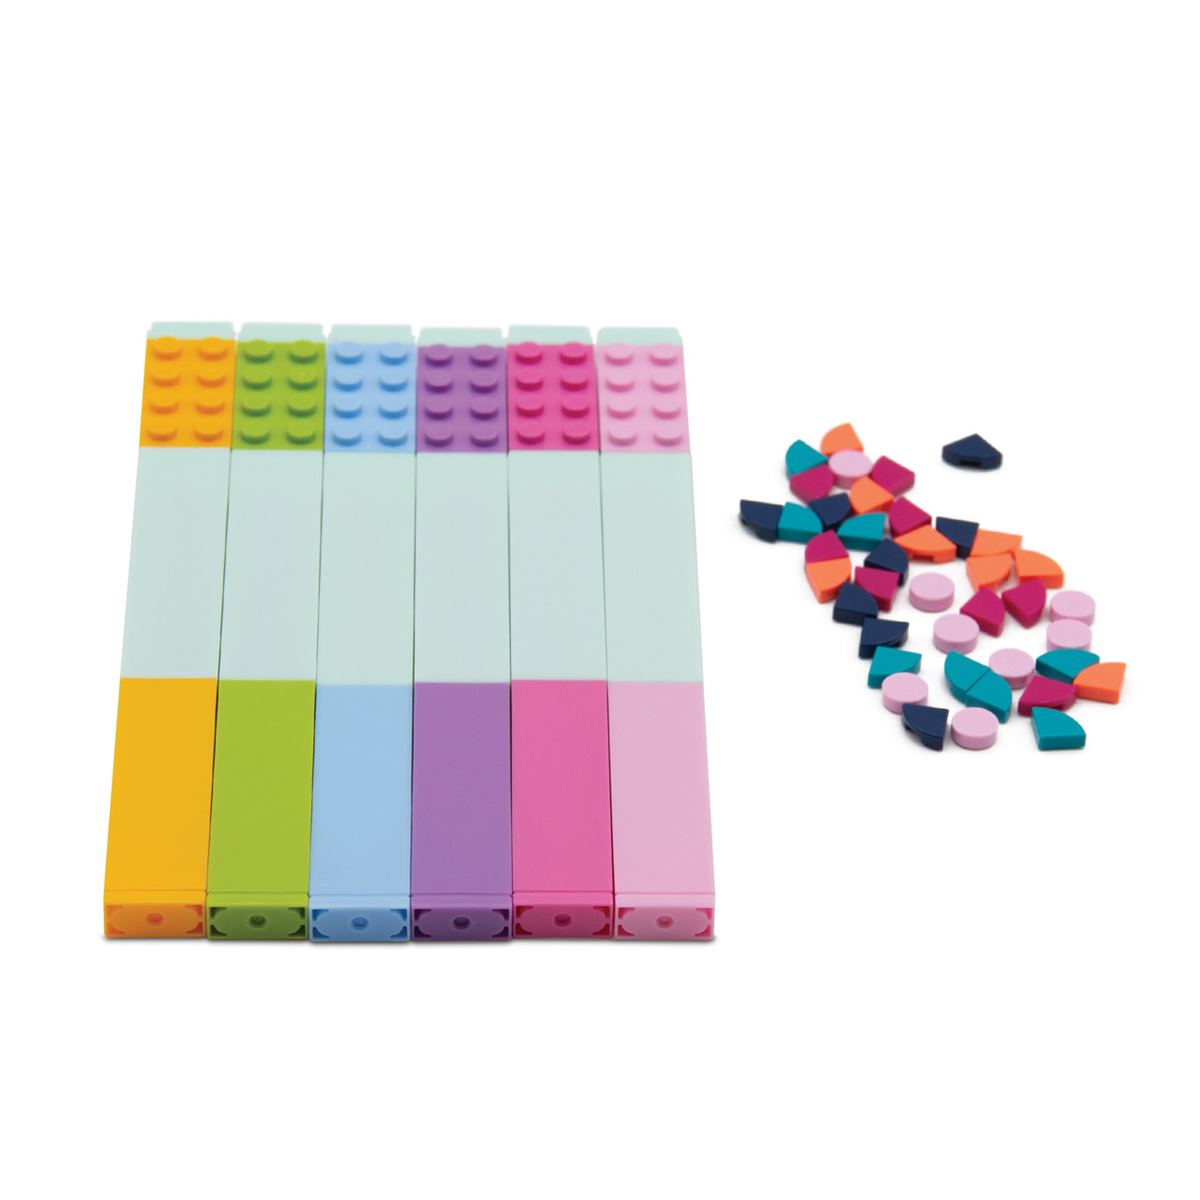 Lego Dots Marker Pens - Pack of 6